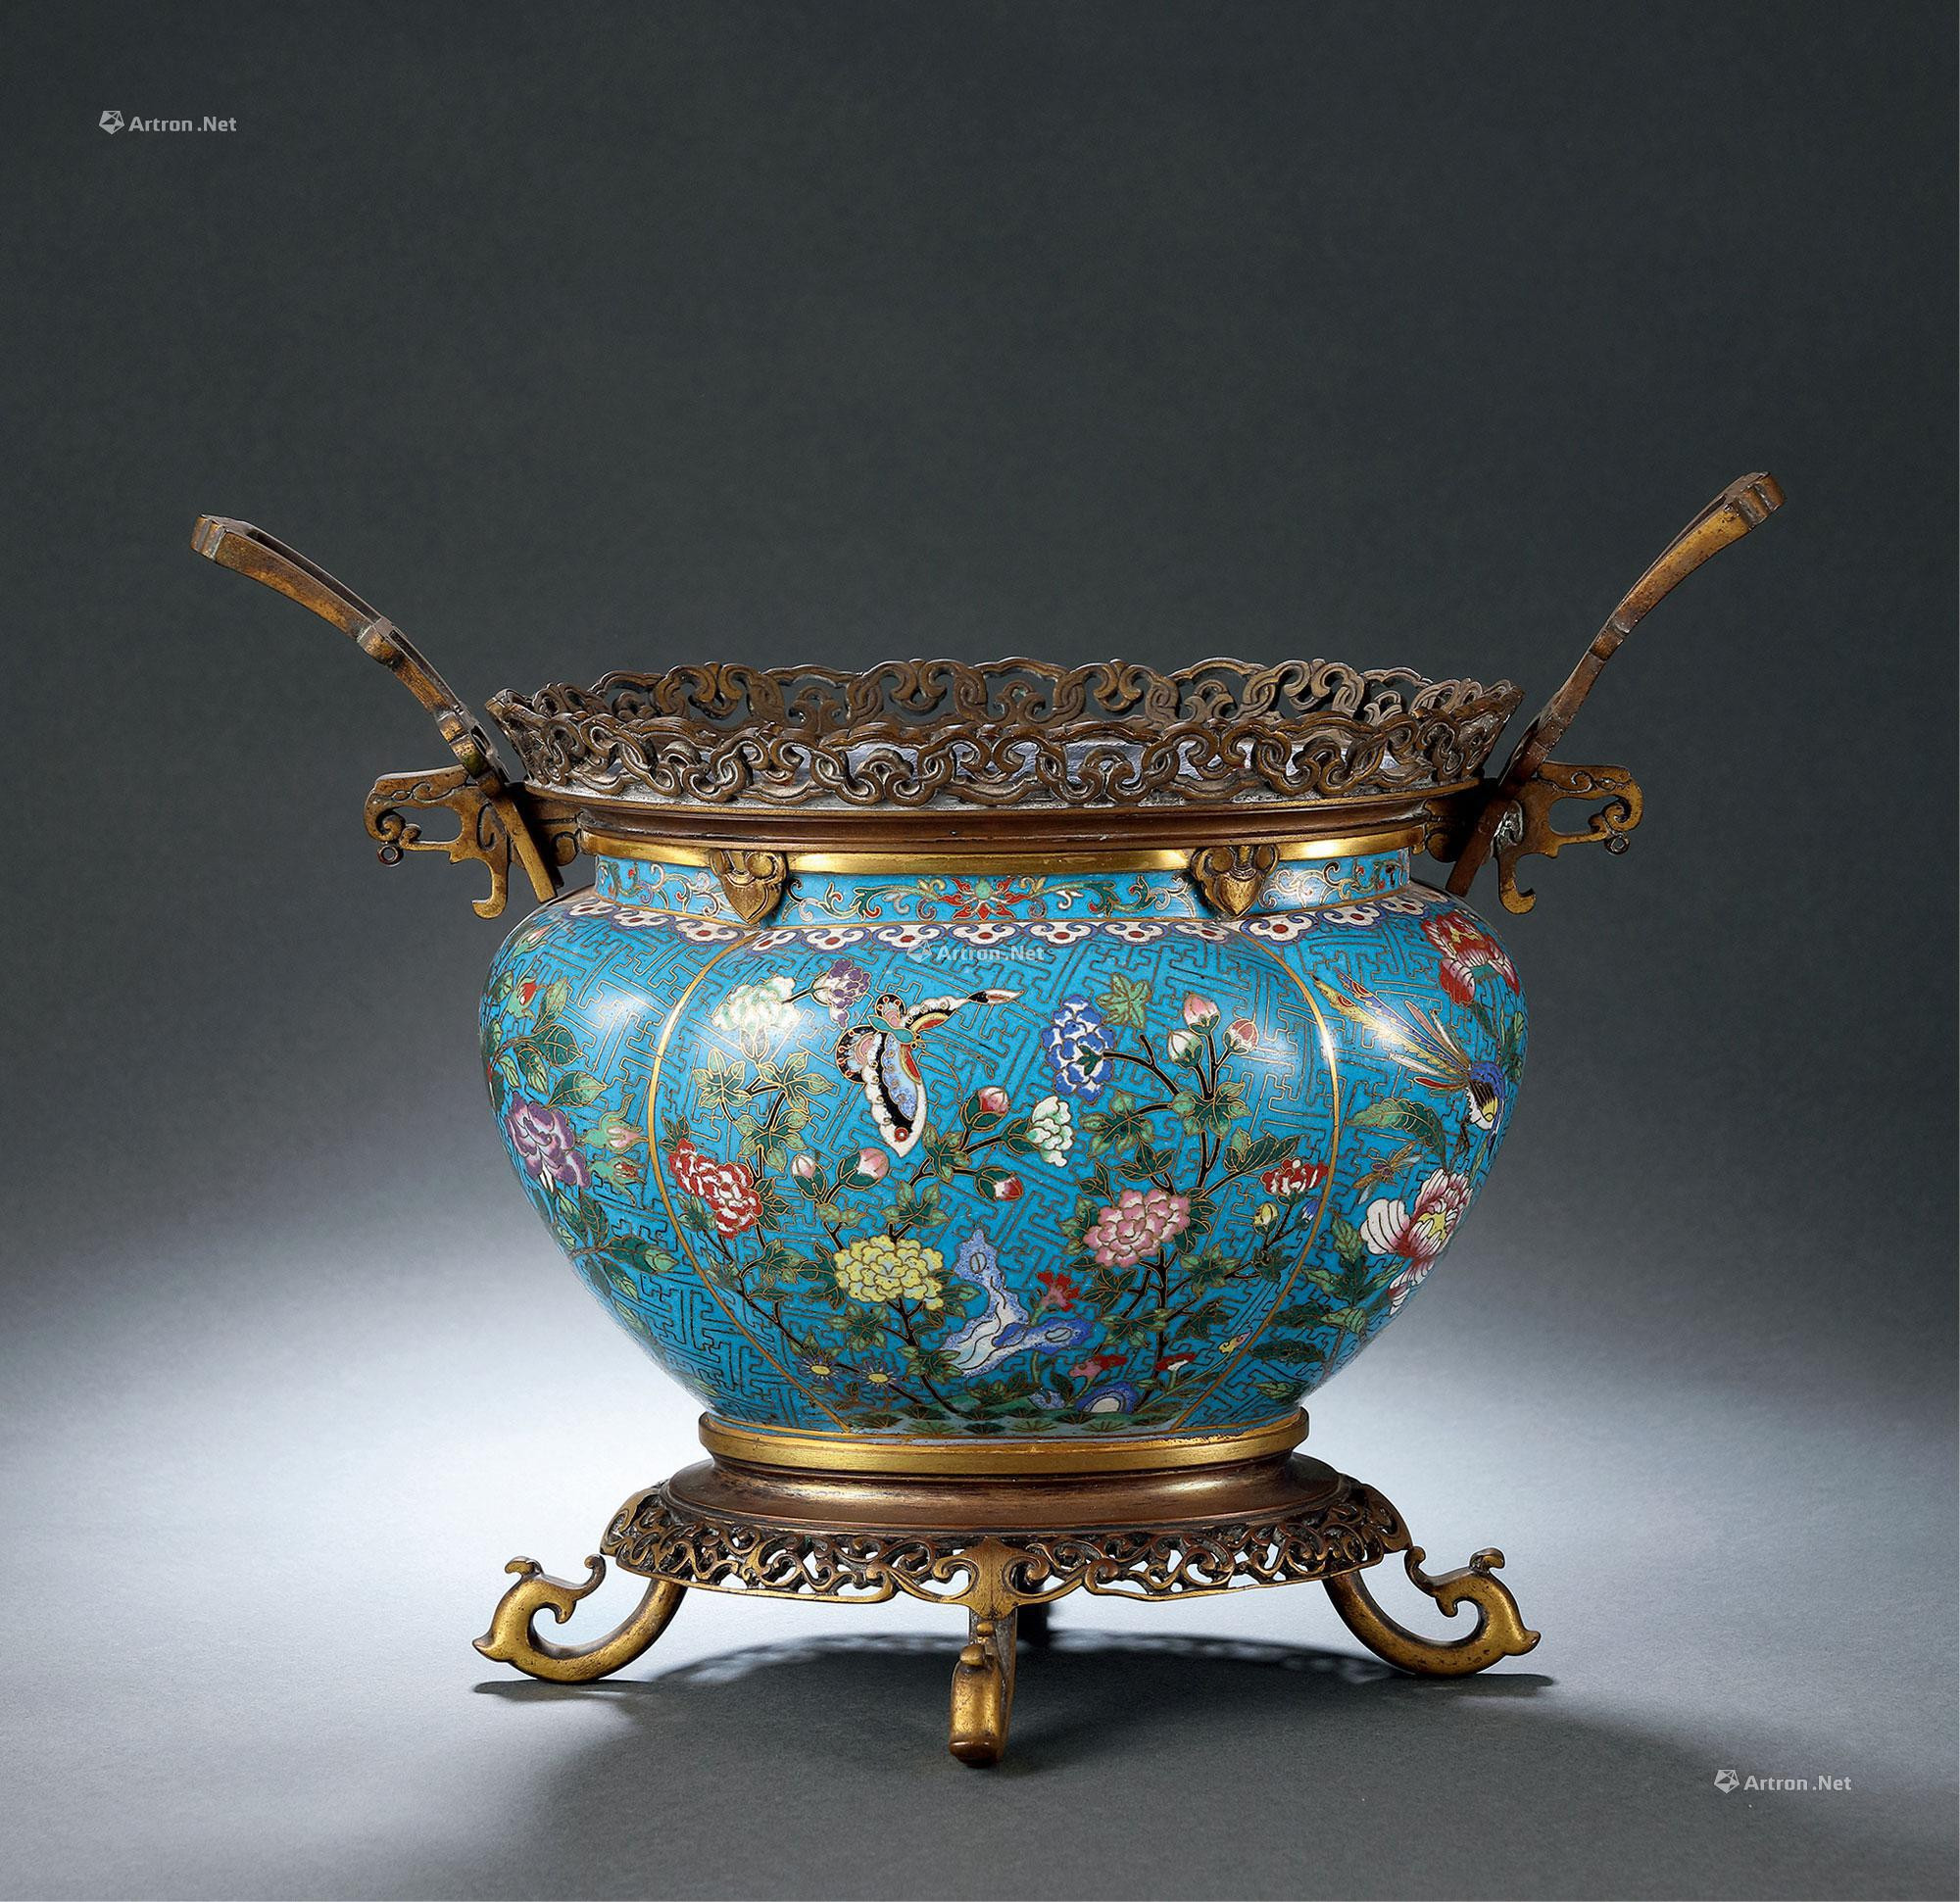 A CLOISONNÉ ENAMEL CRABAPPLE-SHAPED FLOWERPOT WITH DESIGN OF FLOWER AND BUTTERFLY